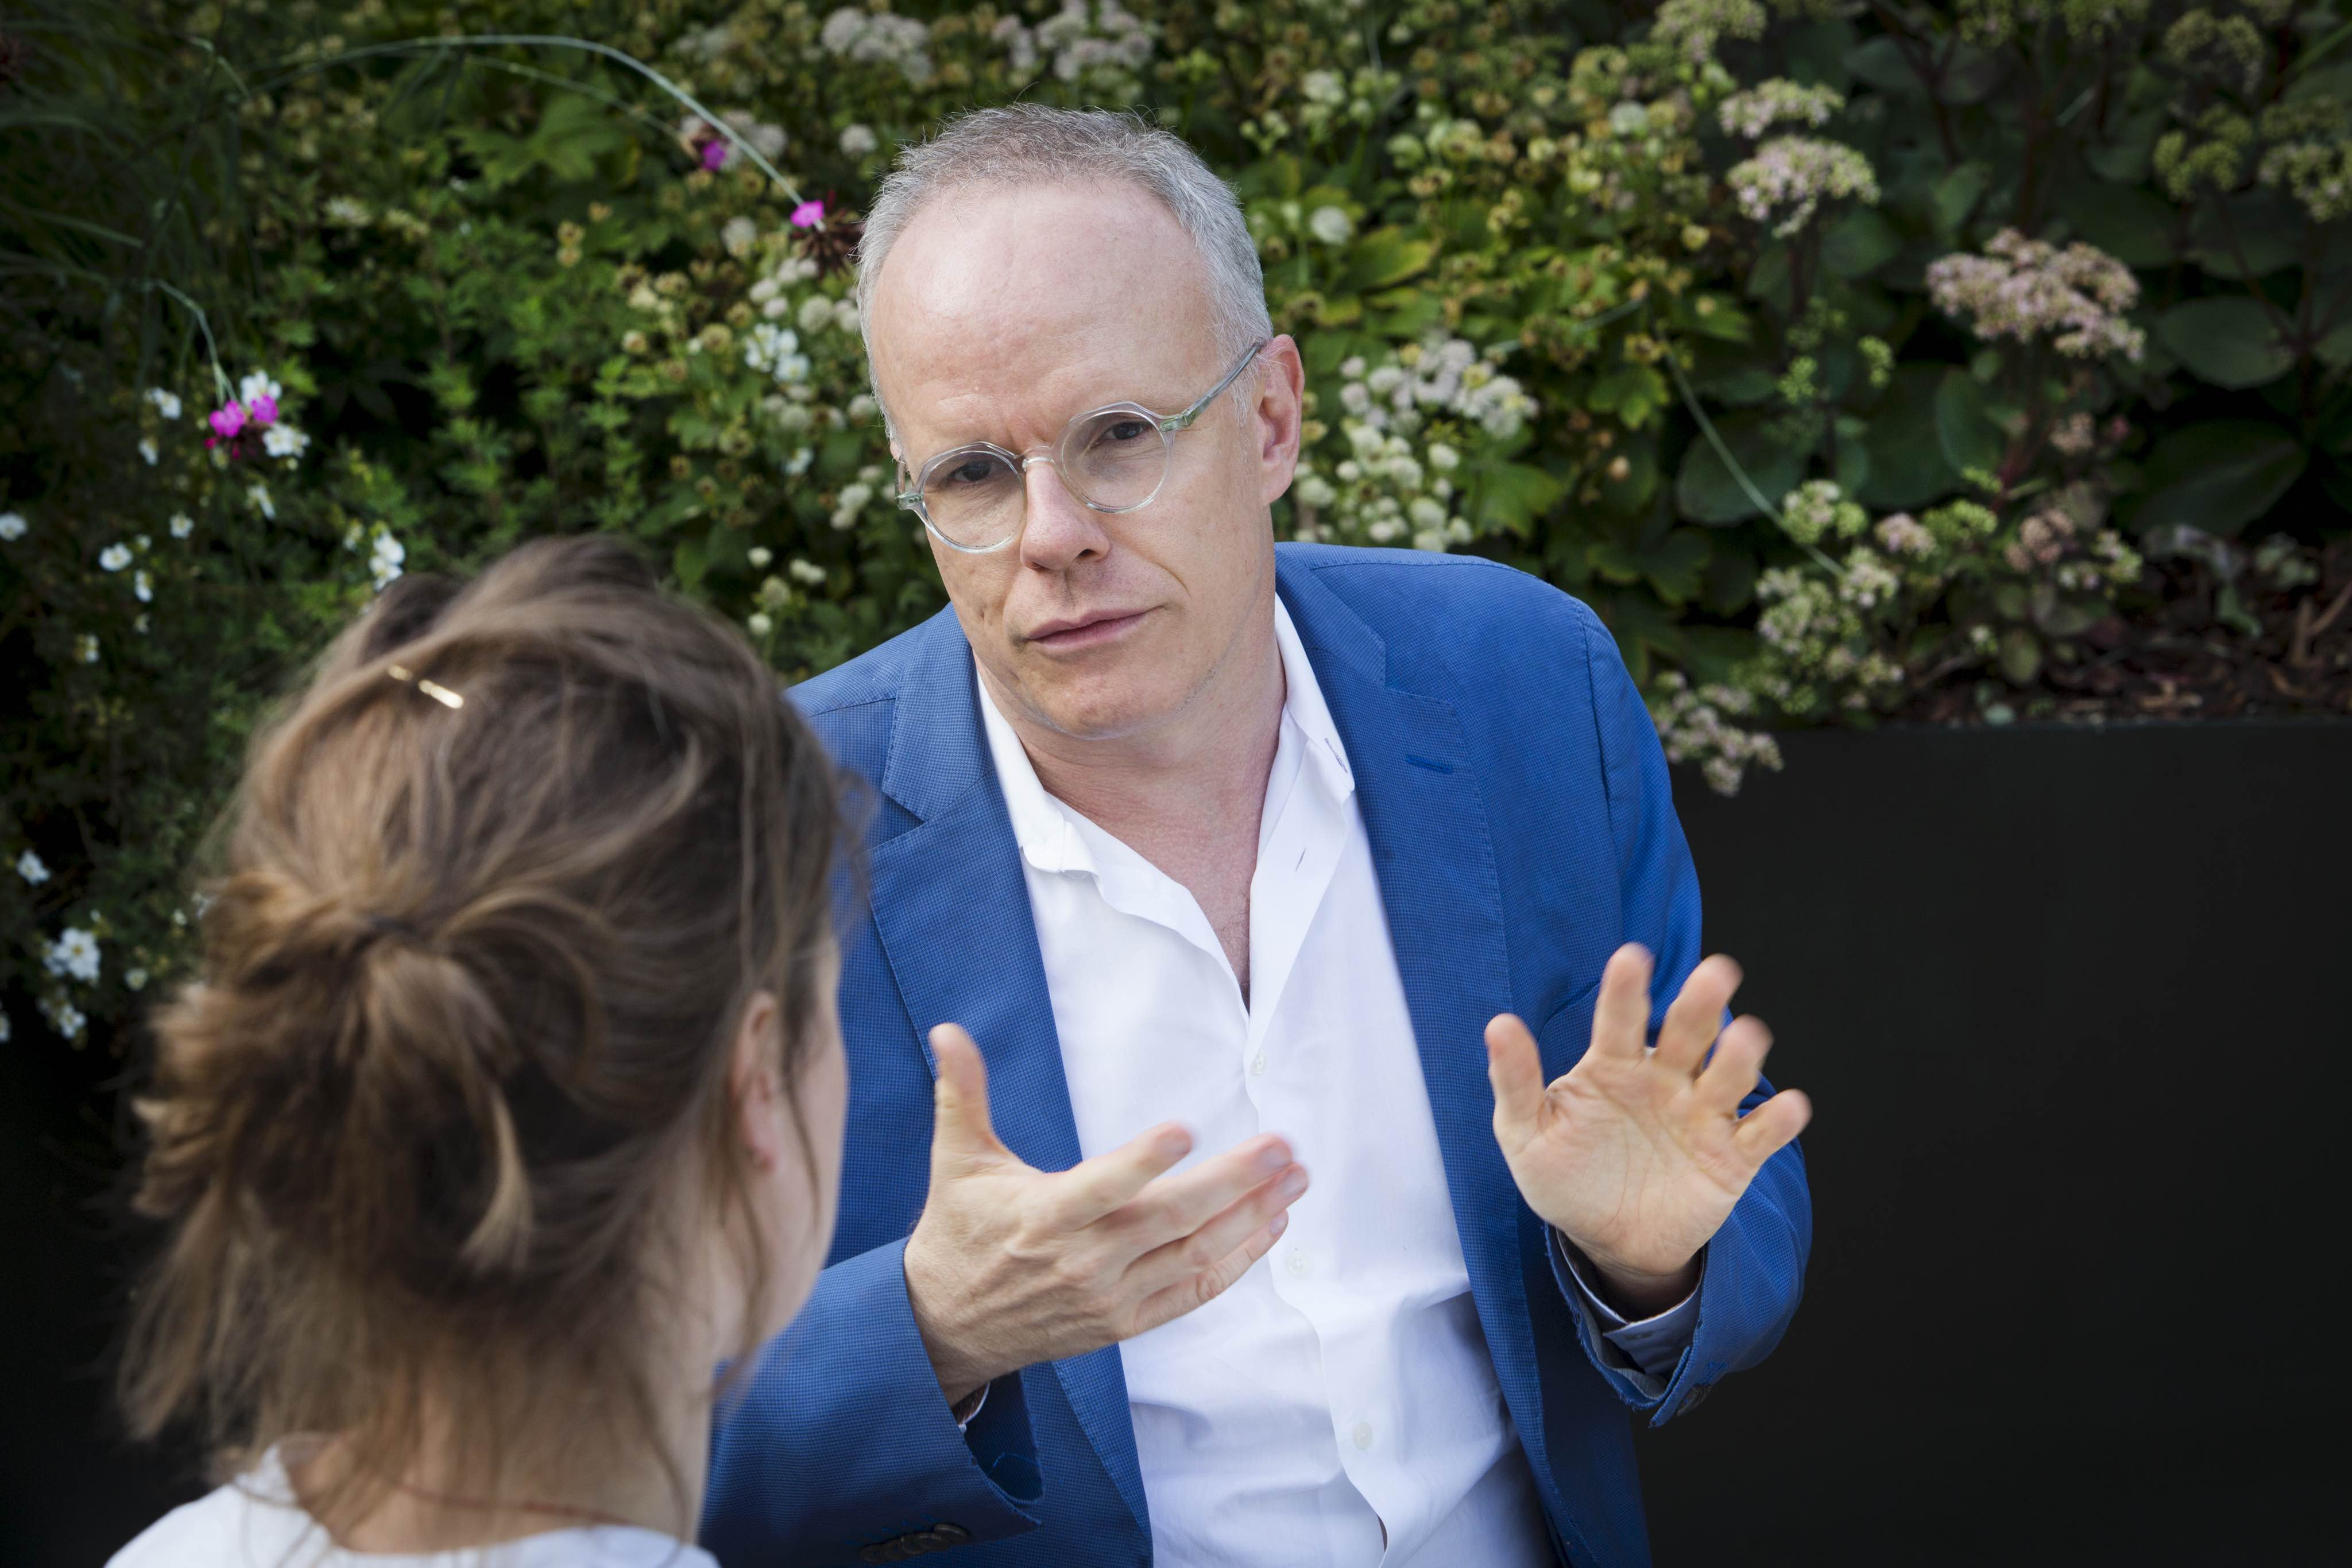 Interview｜THE FUTURE OF CURATIONSHIP WITH TECHNOLOGY Interview With Hans Ulrich Obrist